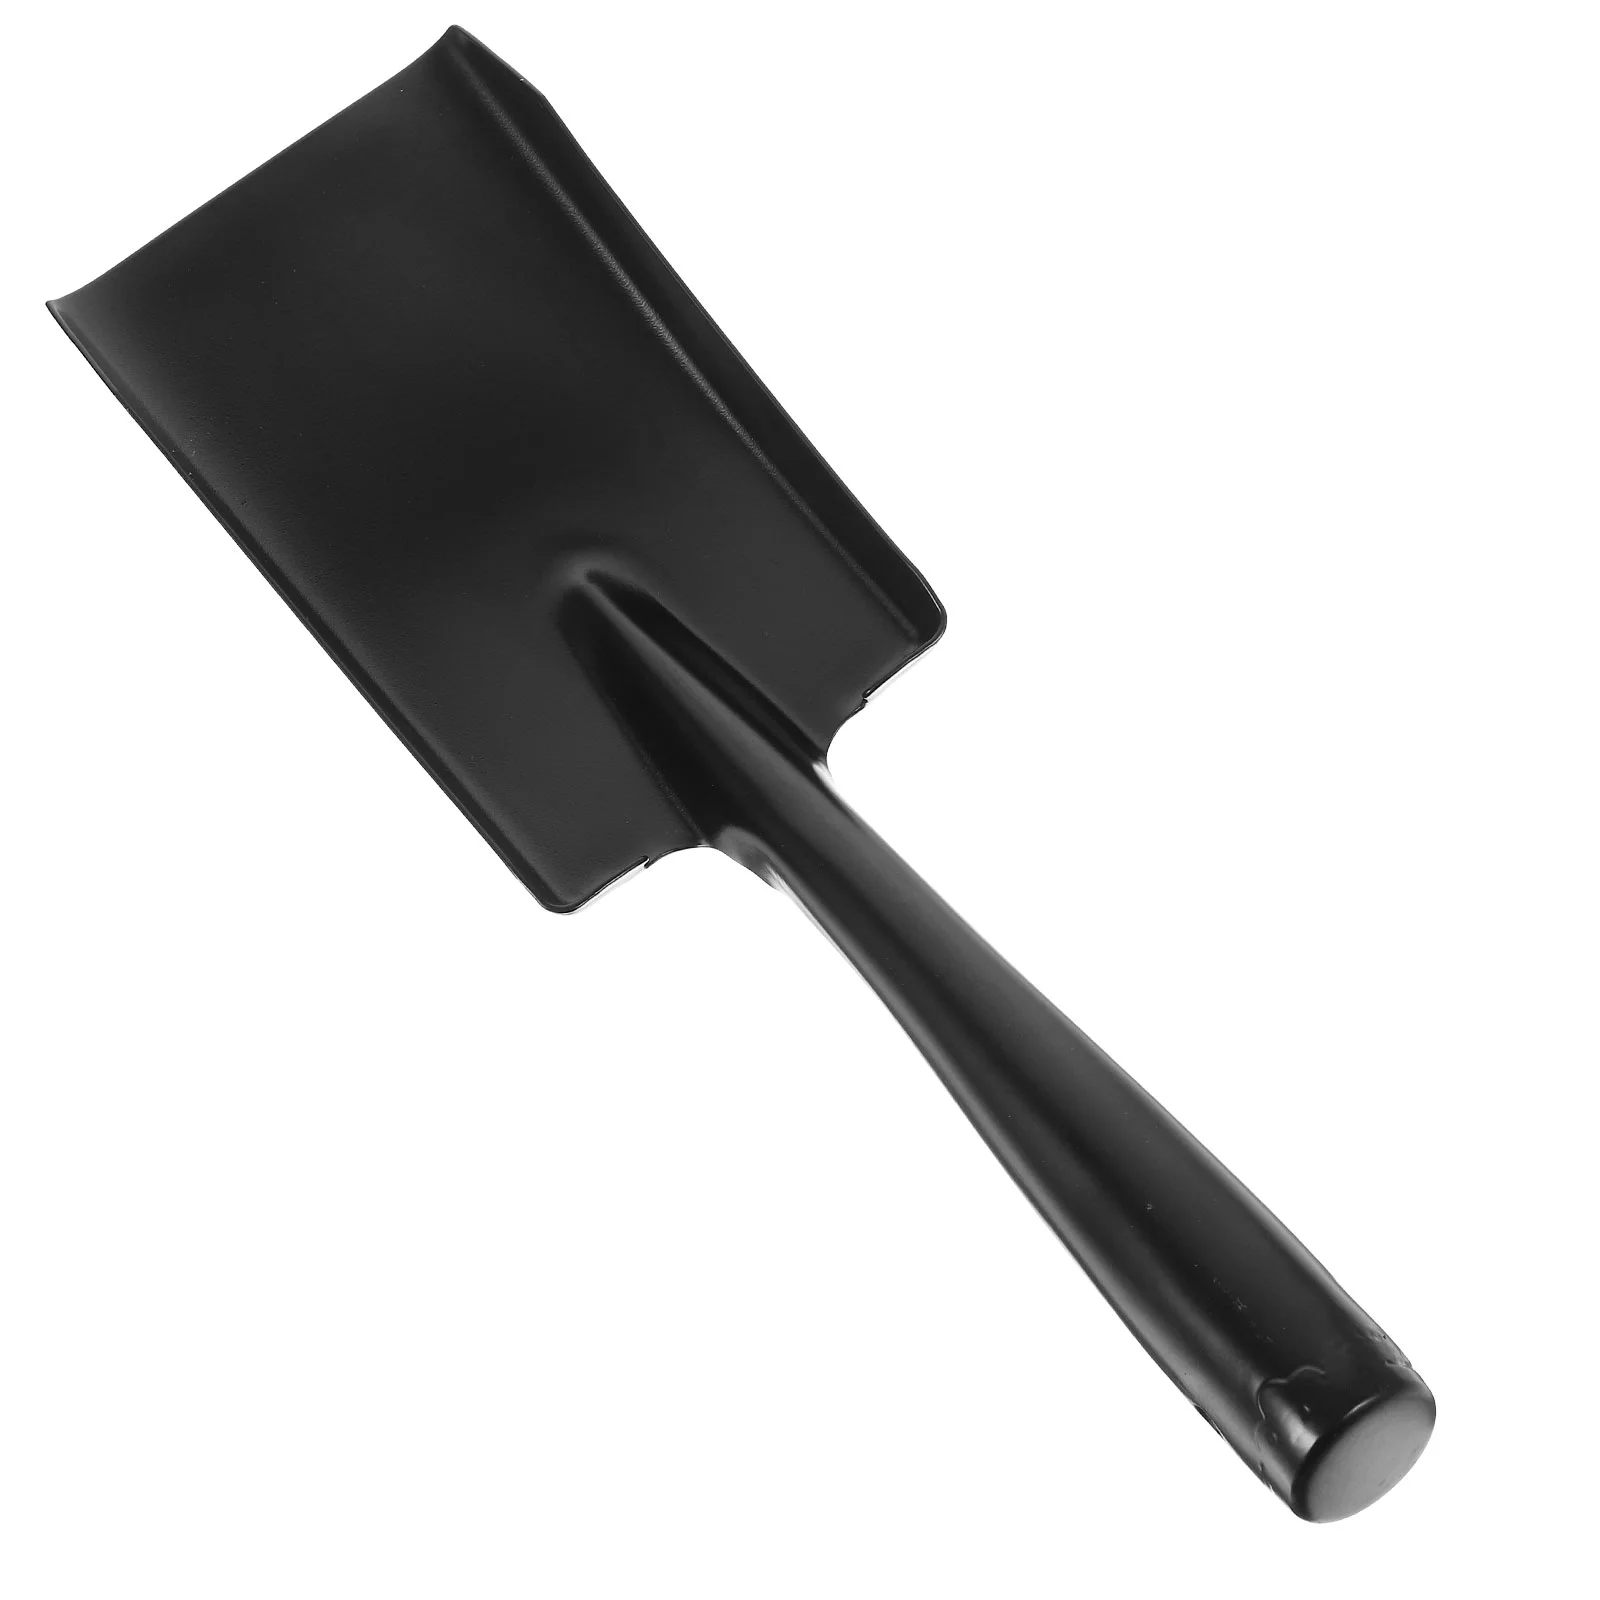 

Gardening Beach Fireplace Small Outdoor Snow Cleaning Tool Manganese Steel Replacement Shovels for Removal